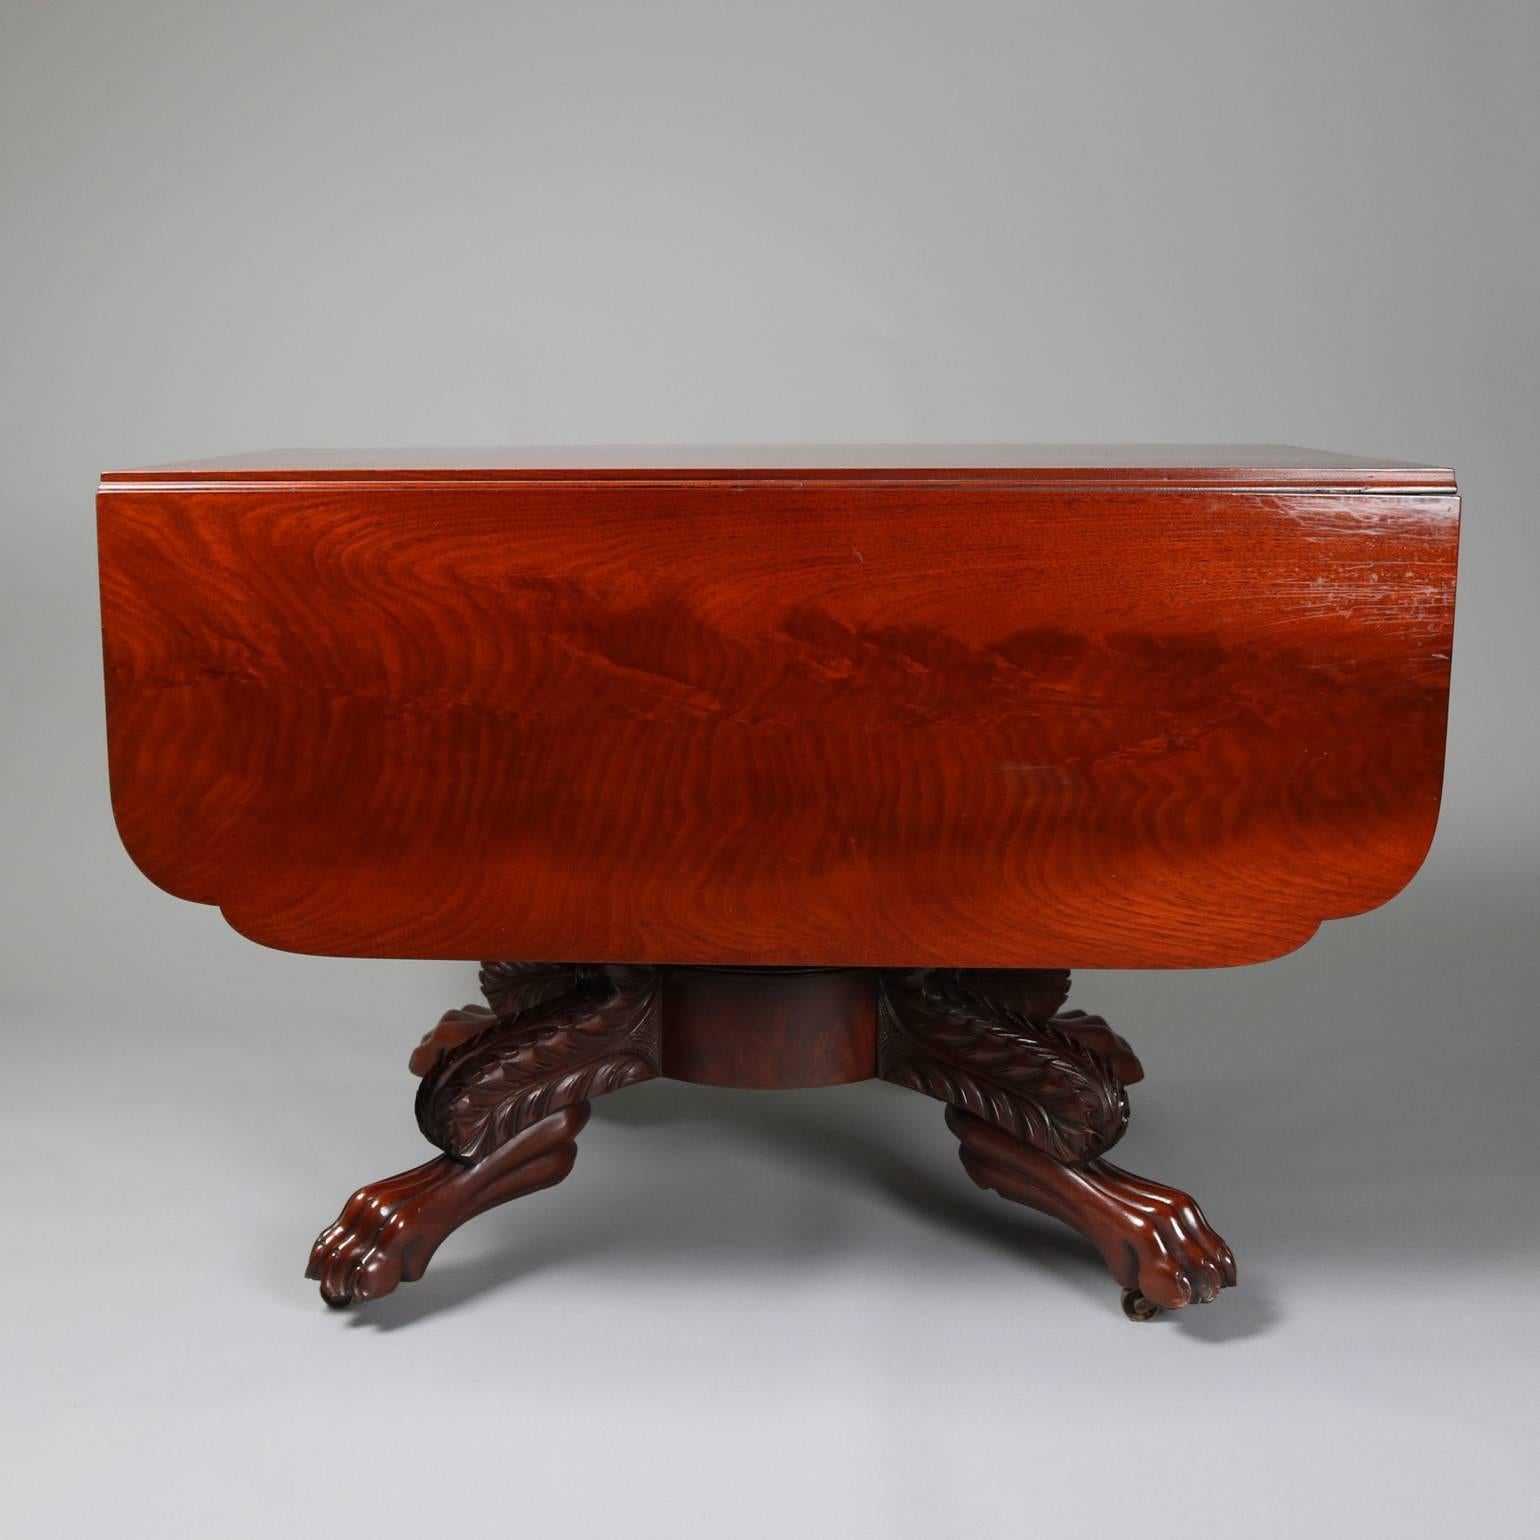 Antique American Empire flame mahogany pedestal table features carved claw feet with acanthus decorated legs and scalloped drop-leaf top, circa 1850

Measures: 28.5" H x 42" D x 23.5" W closed, 53.5" W open.